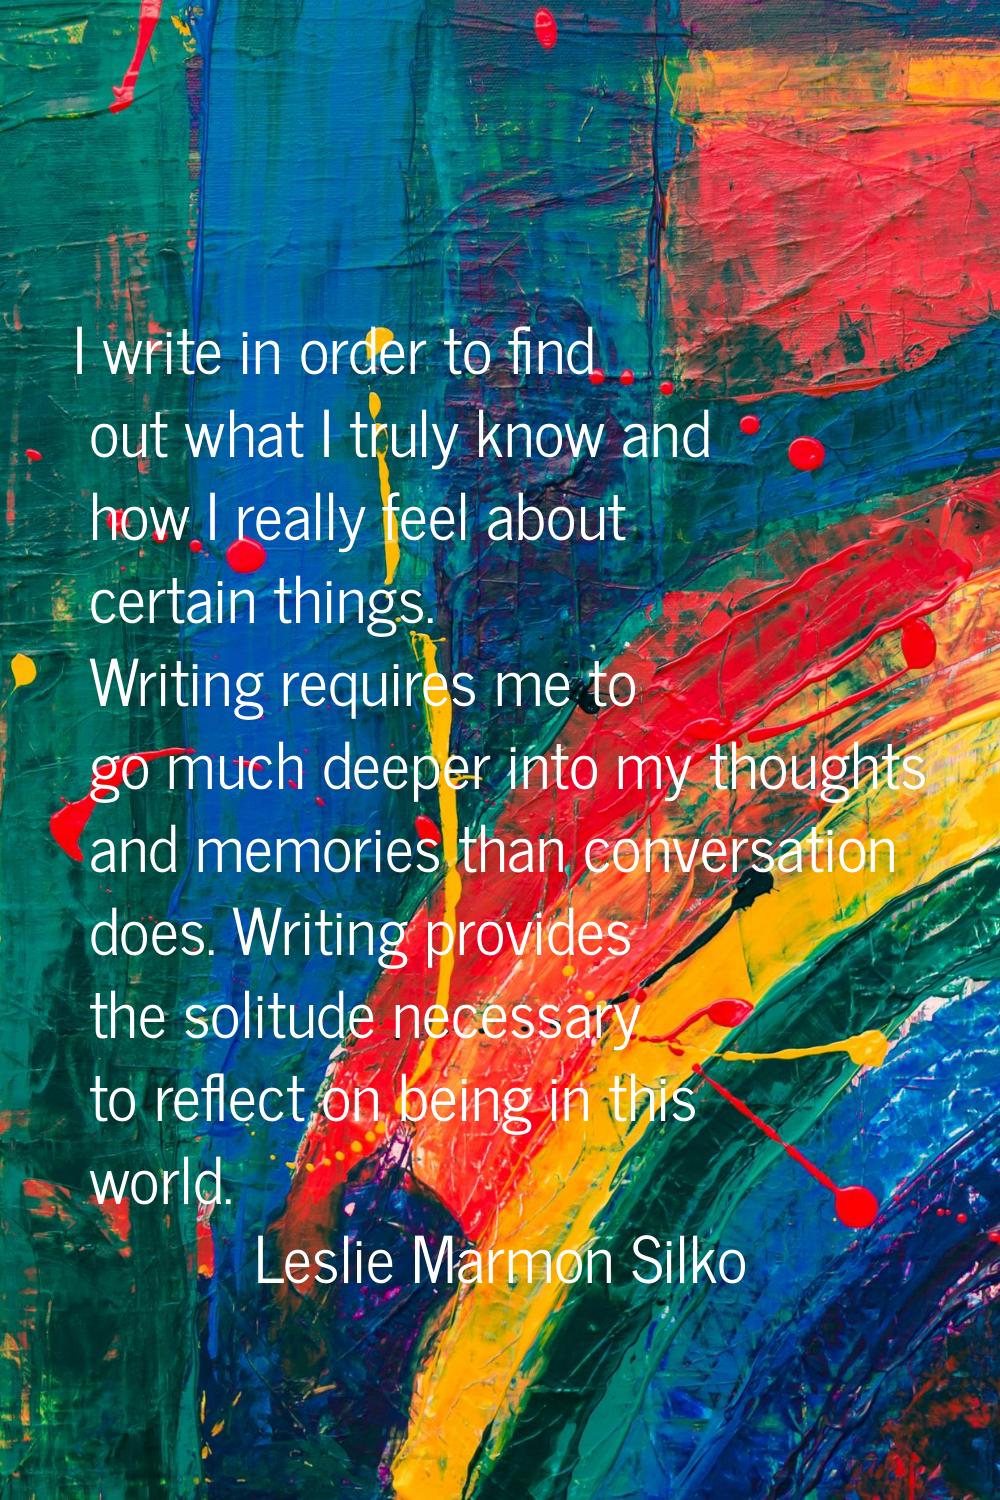 I write in order to find out what I truly know and how I really feel about certain things. Writing 